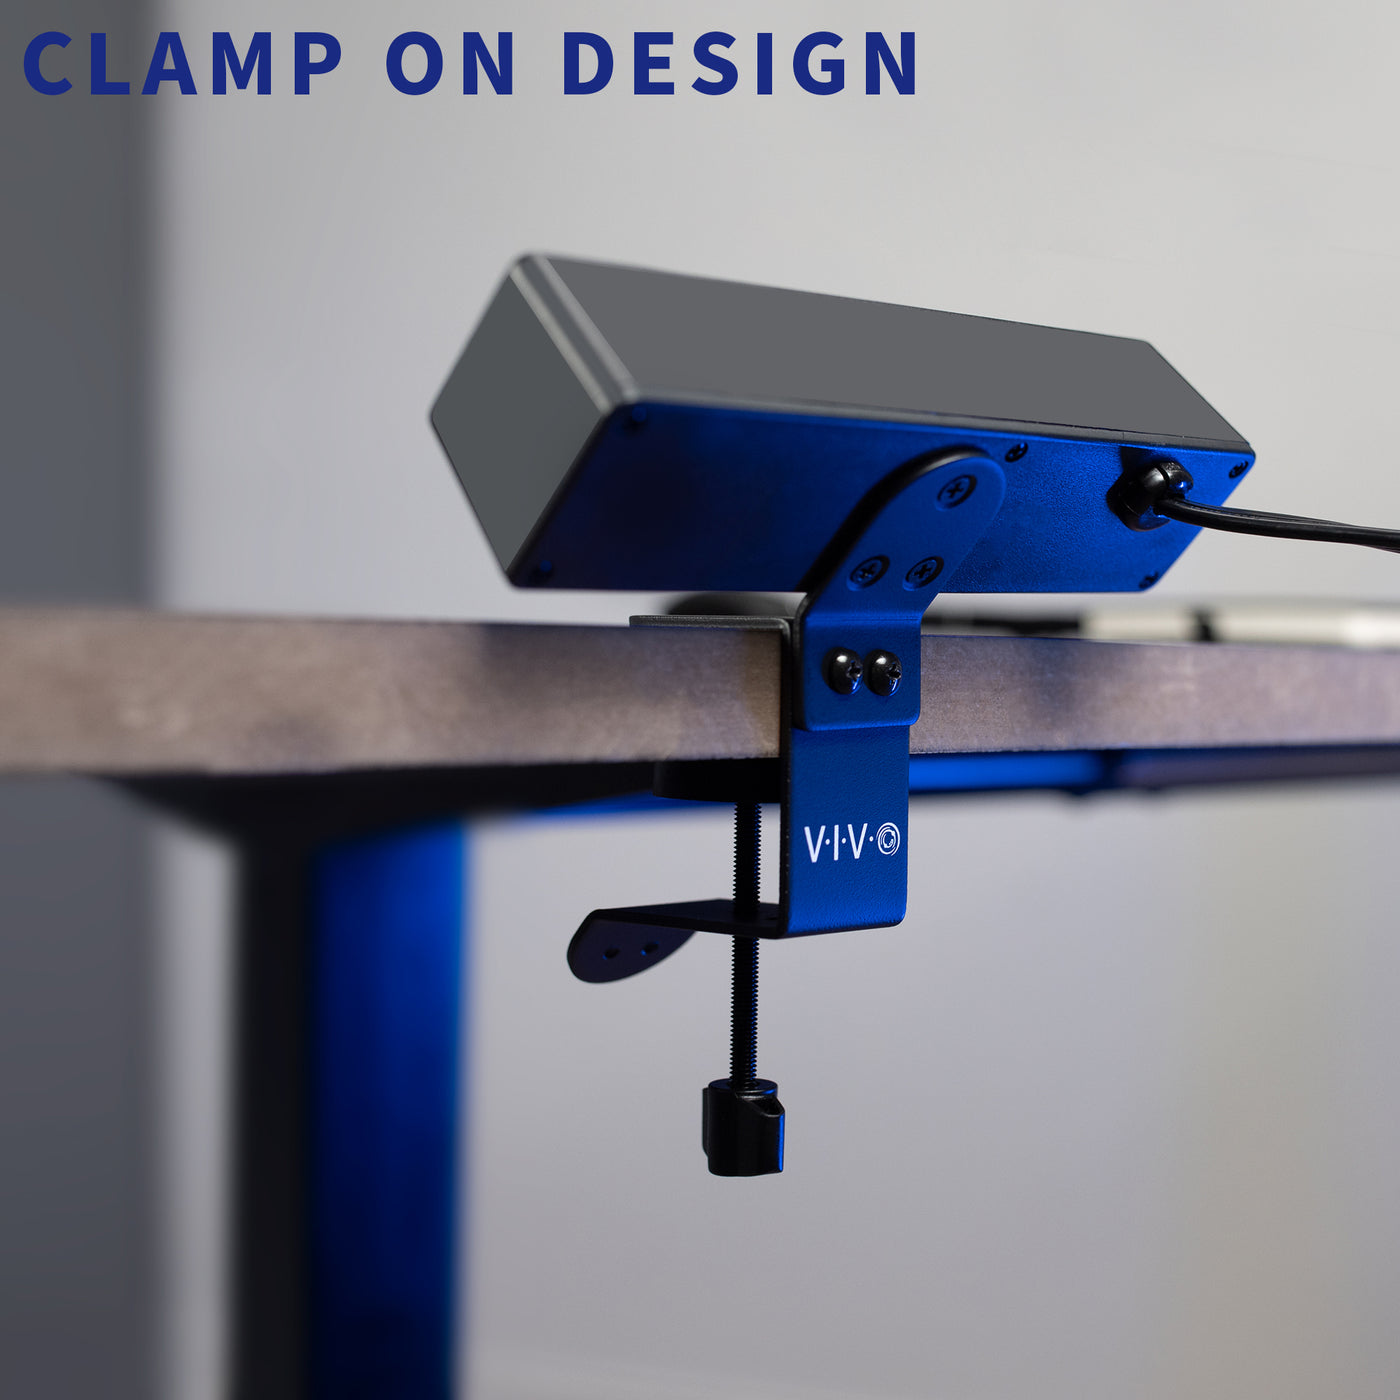 Easy clamp-on design allowing for quick and smooth installation.